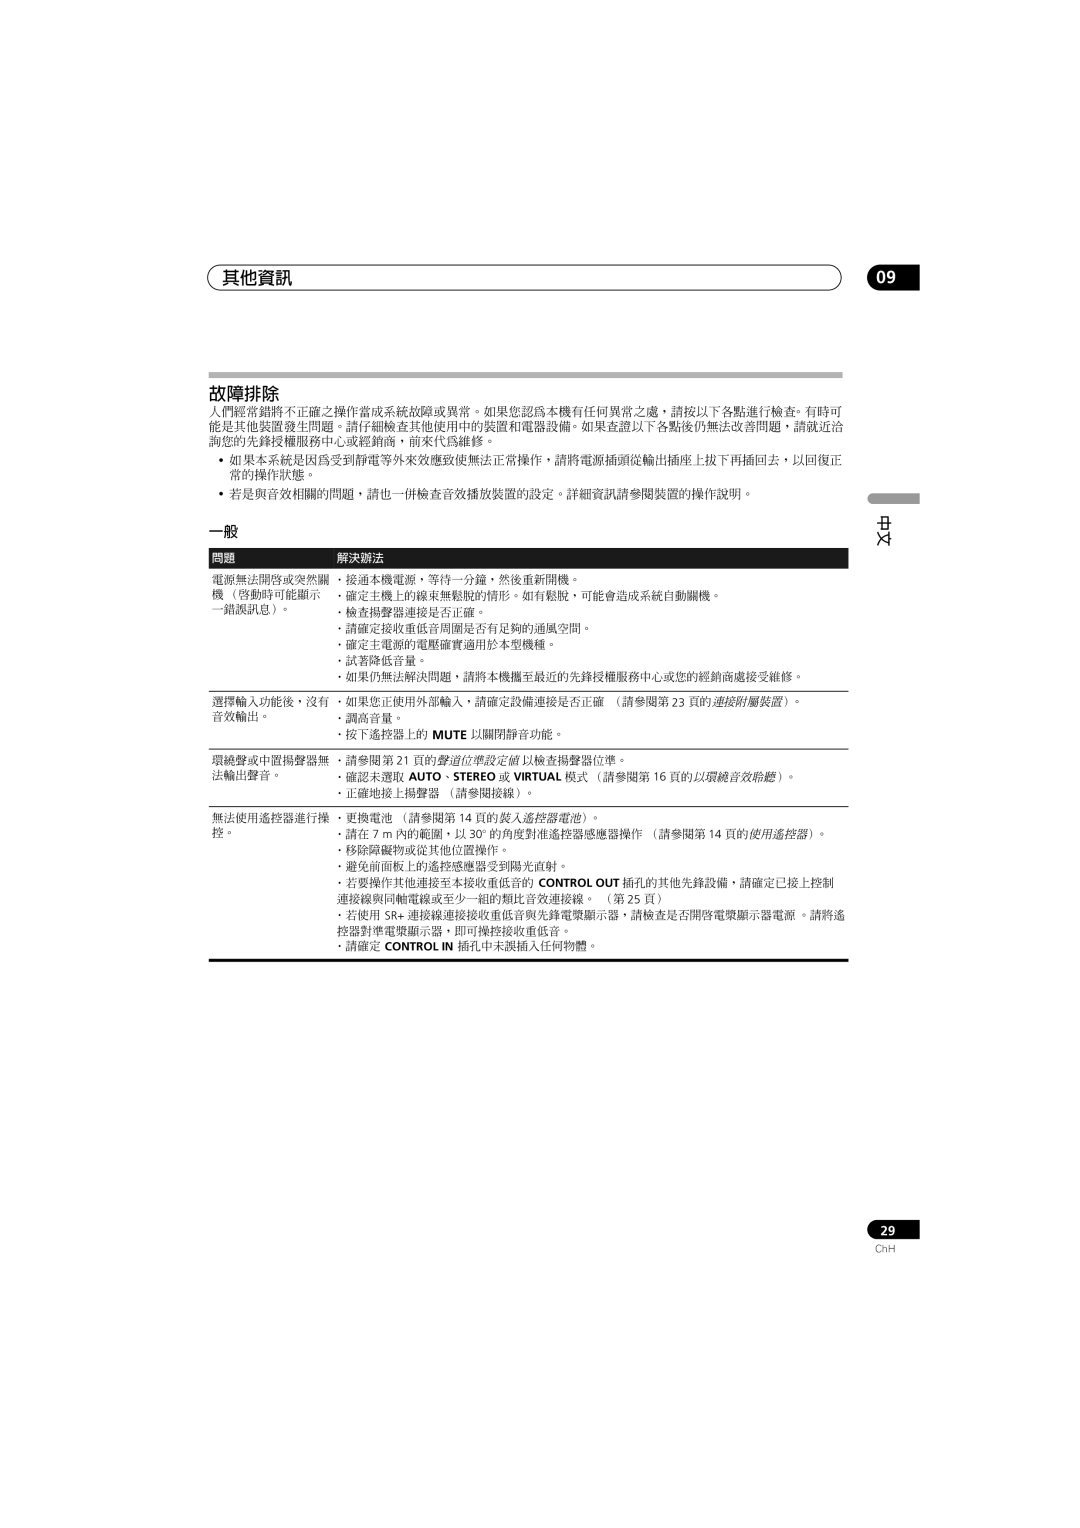 Pioneer HTP-330, SX-SW330, S-ST330 operating instructions 其他資訊 故障排除, 問題 解決辦法 